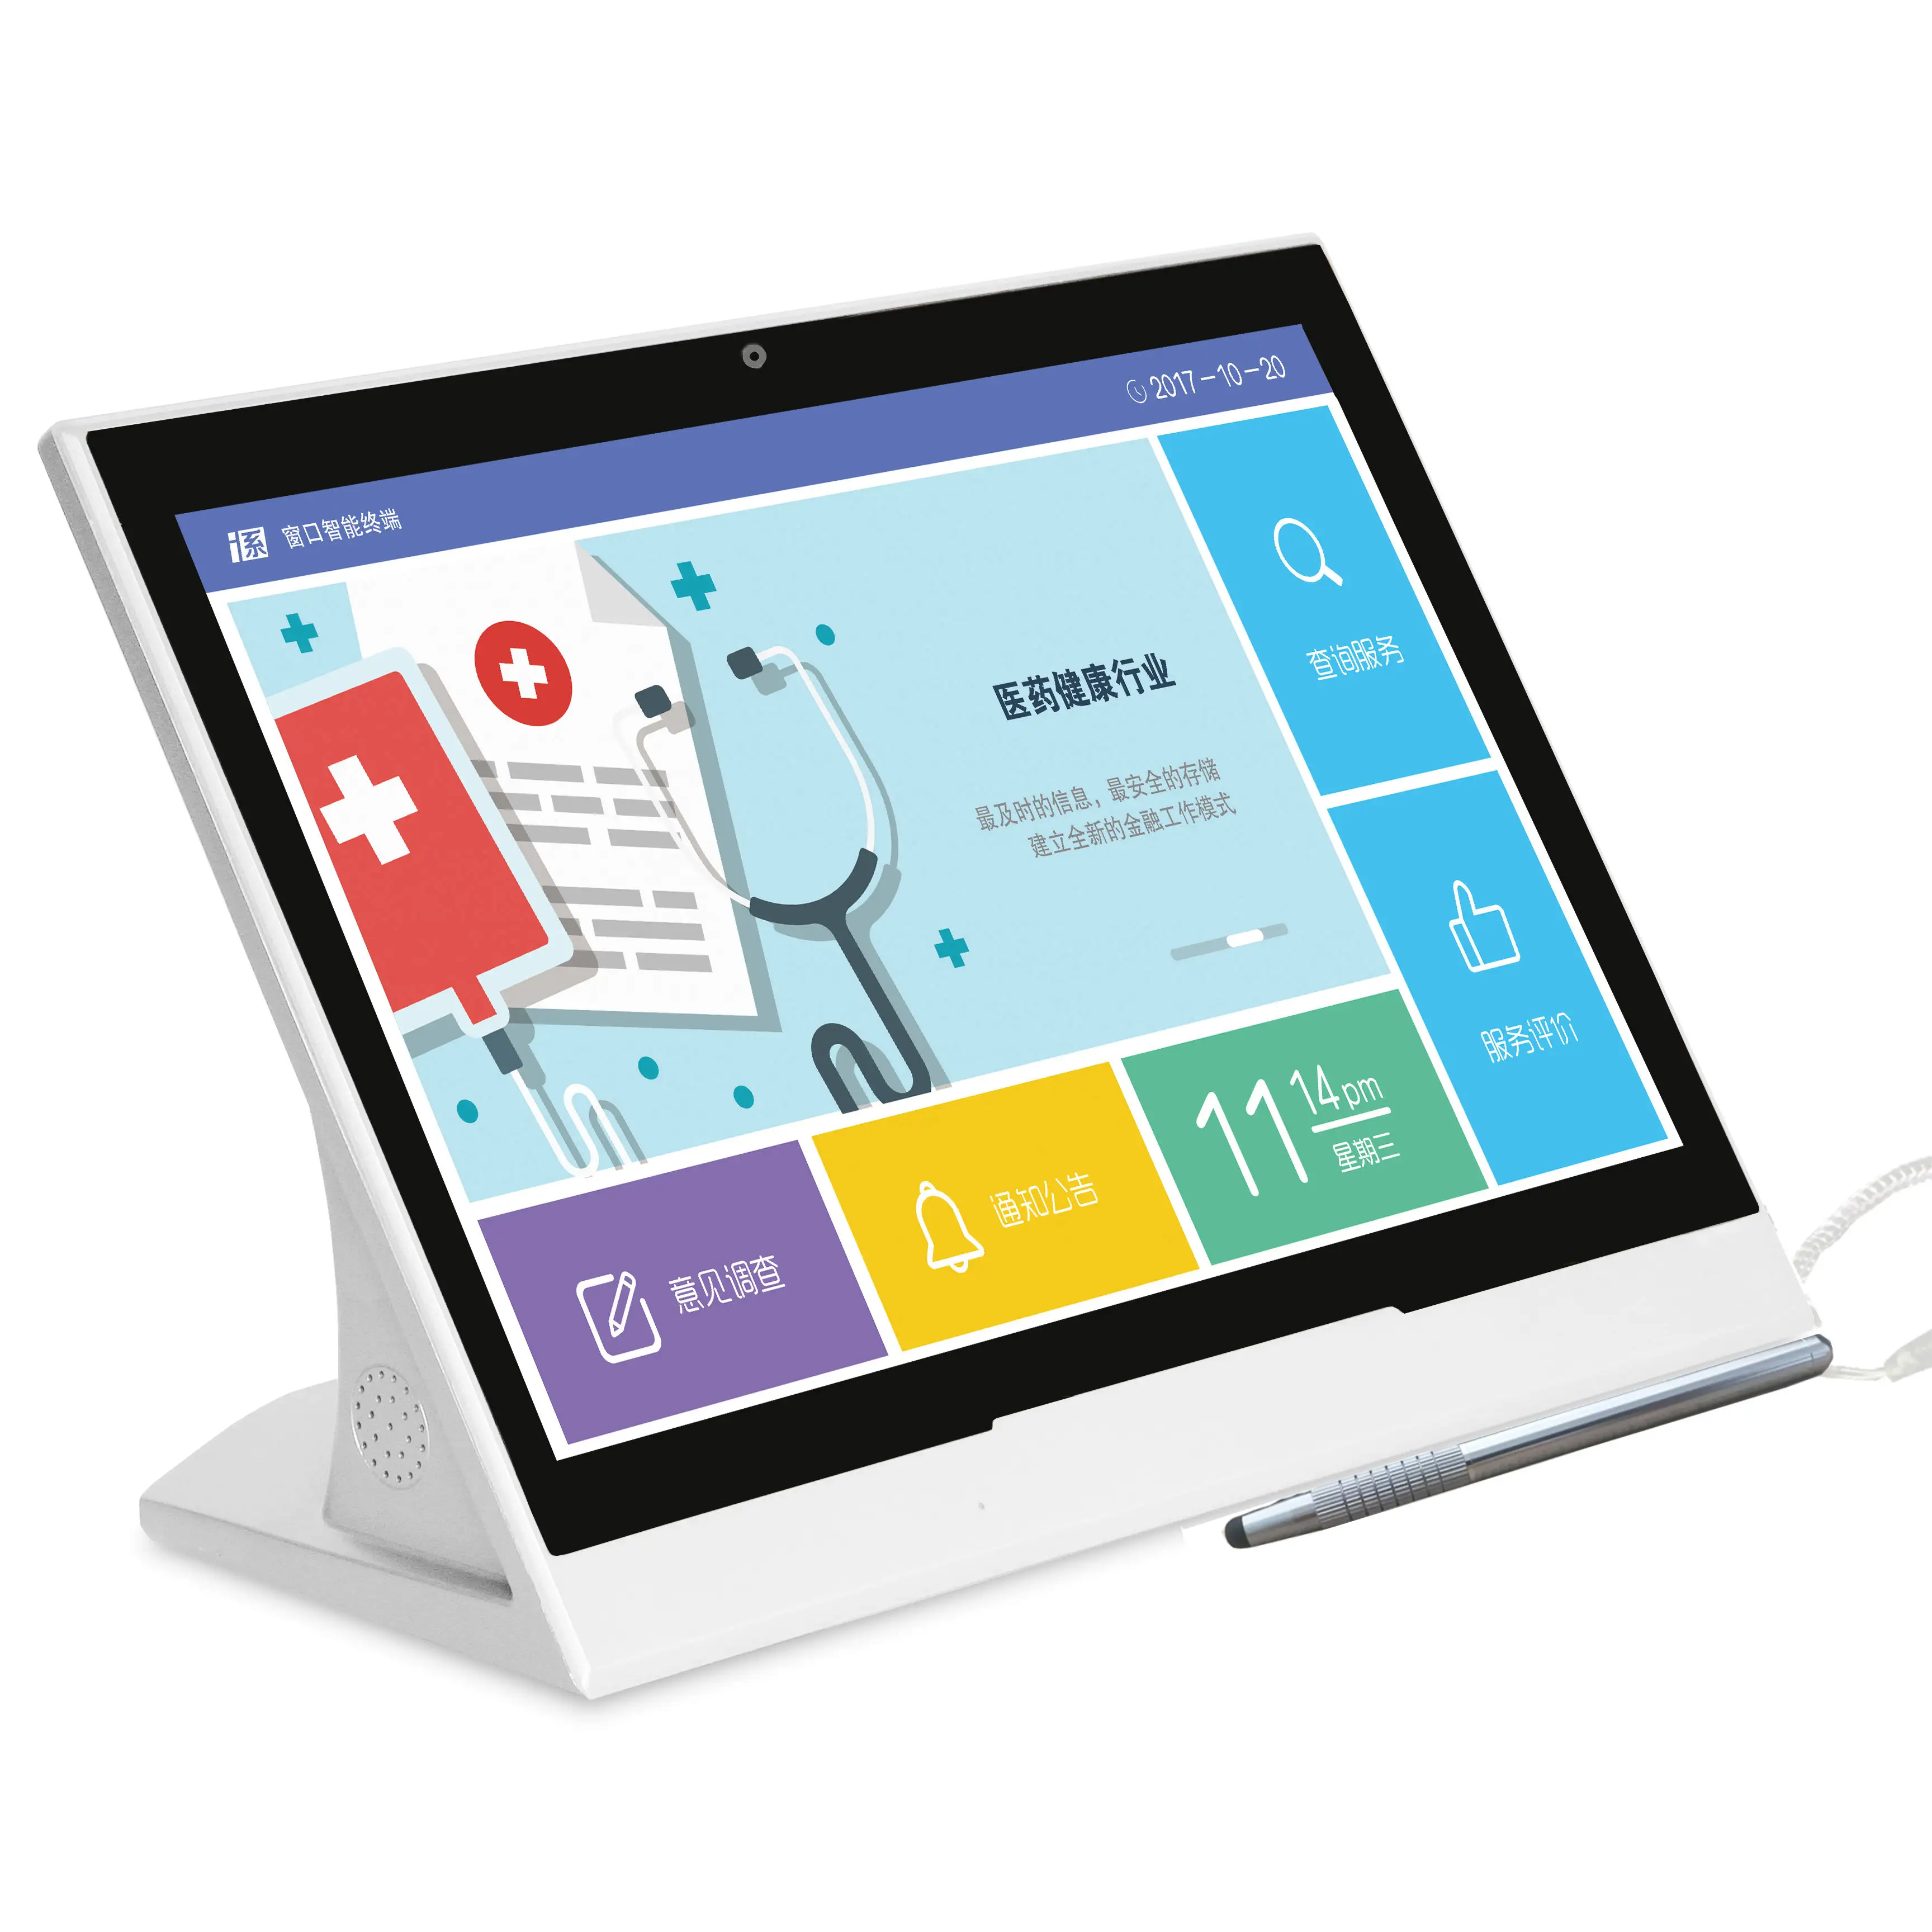 ODM Medical Android Tablet 13.3 "15" Smart Android Pos/Medical/Industrial/KIOSK Medical Tablet Pc Android for Hospital